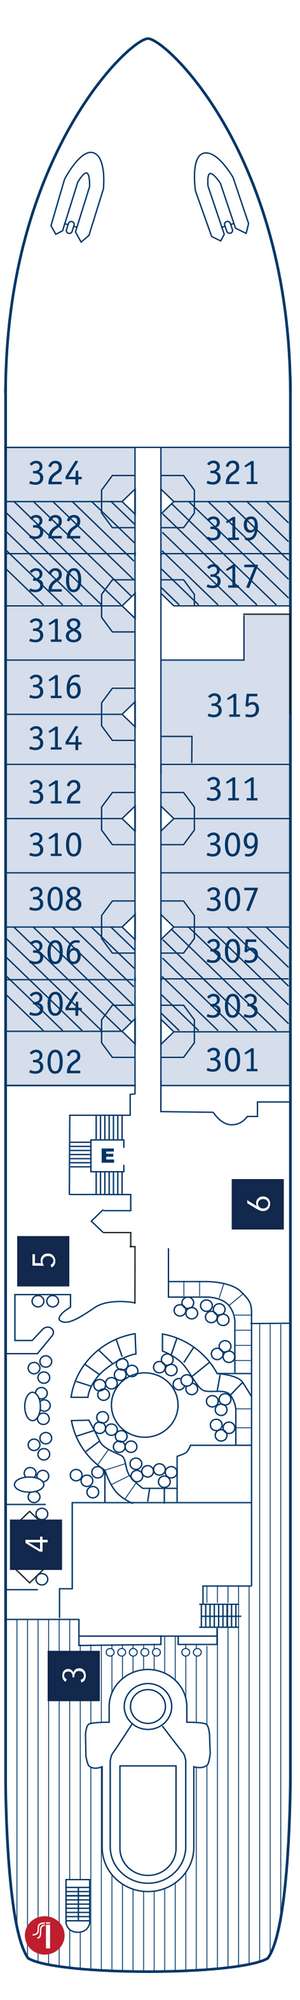 Deck plan for SeaDream I